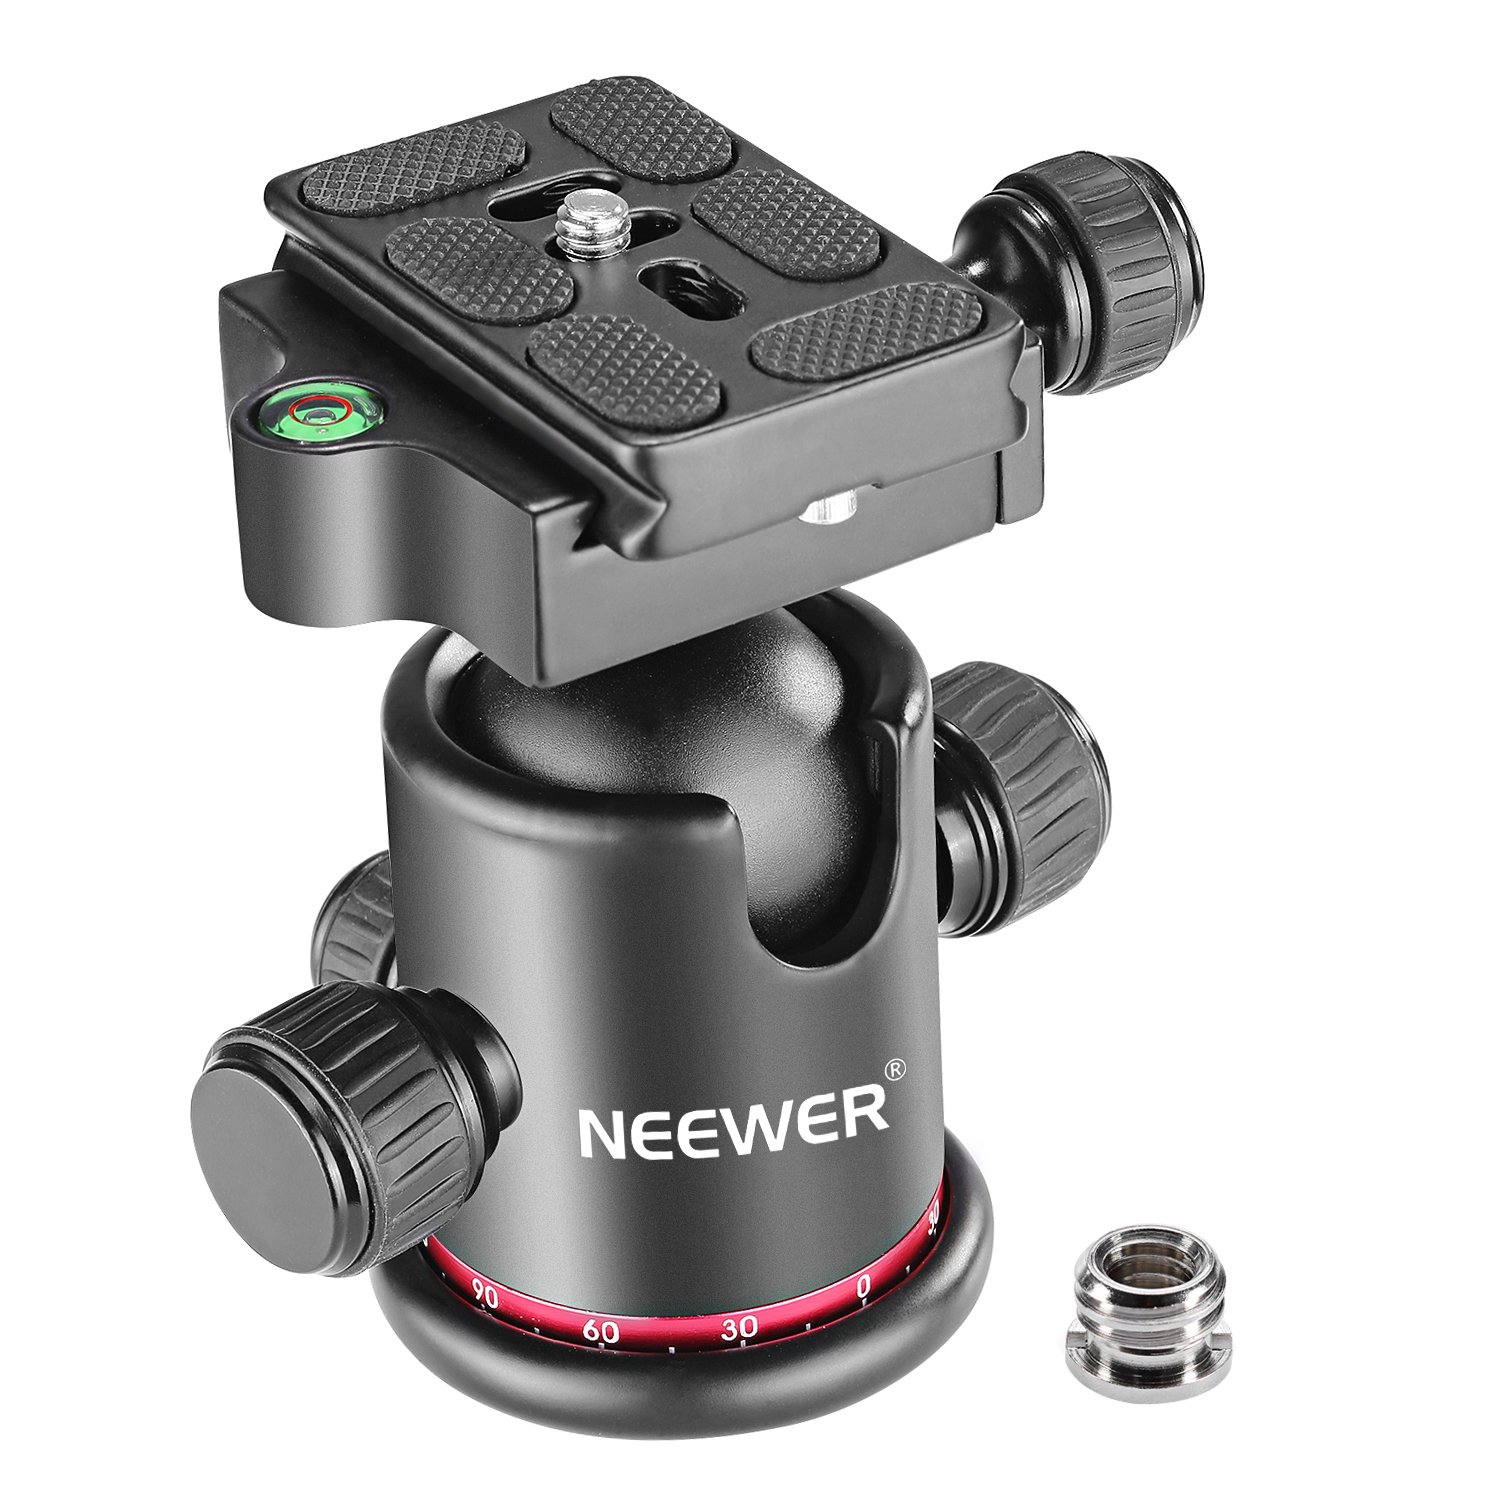 Quick release mount for 360 cameras